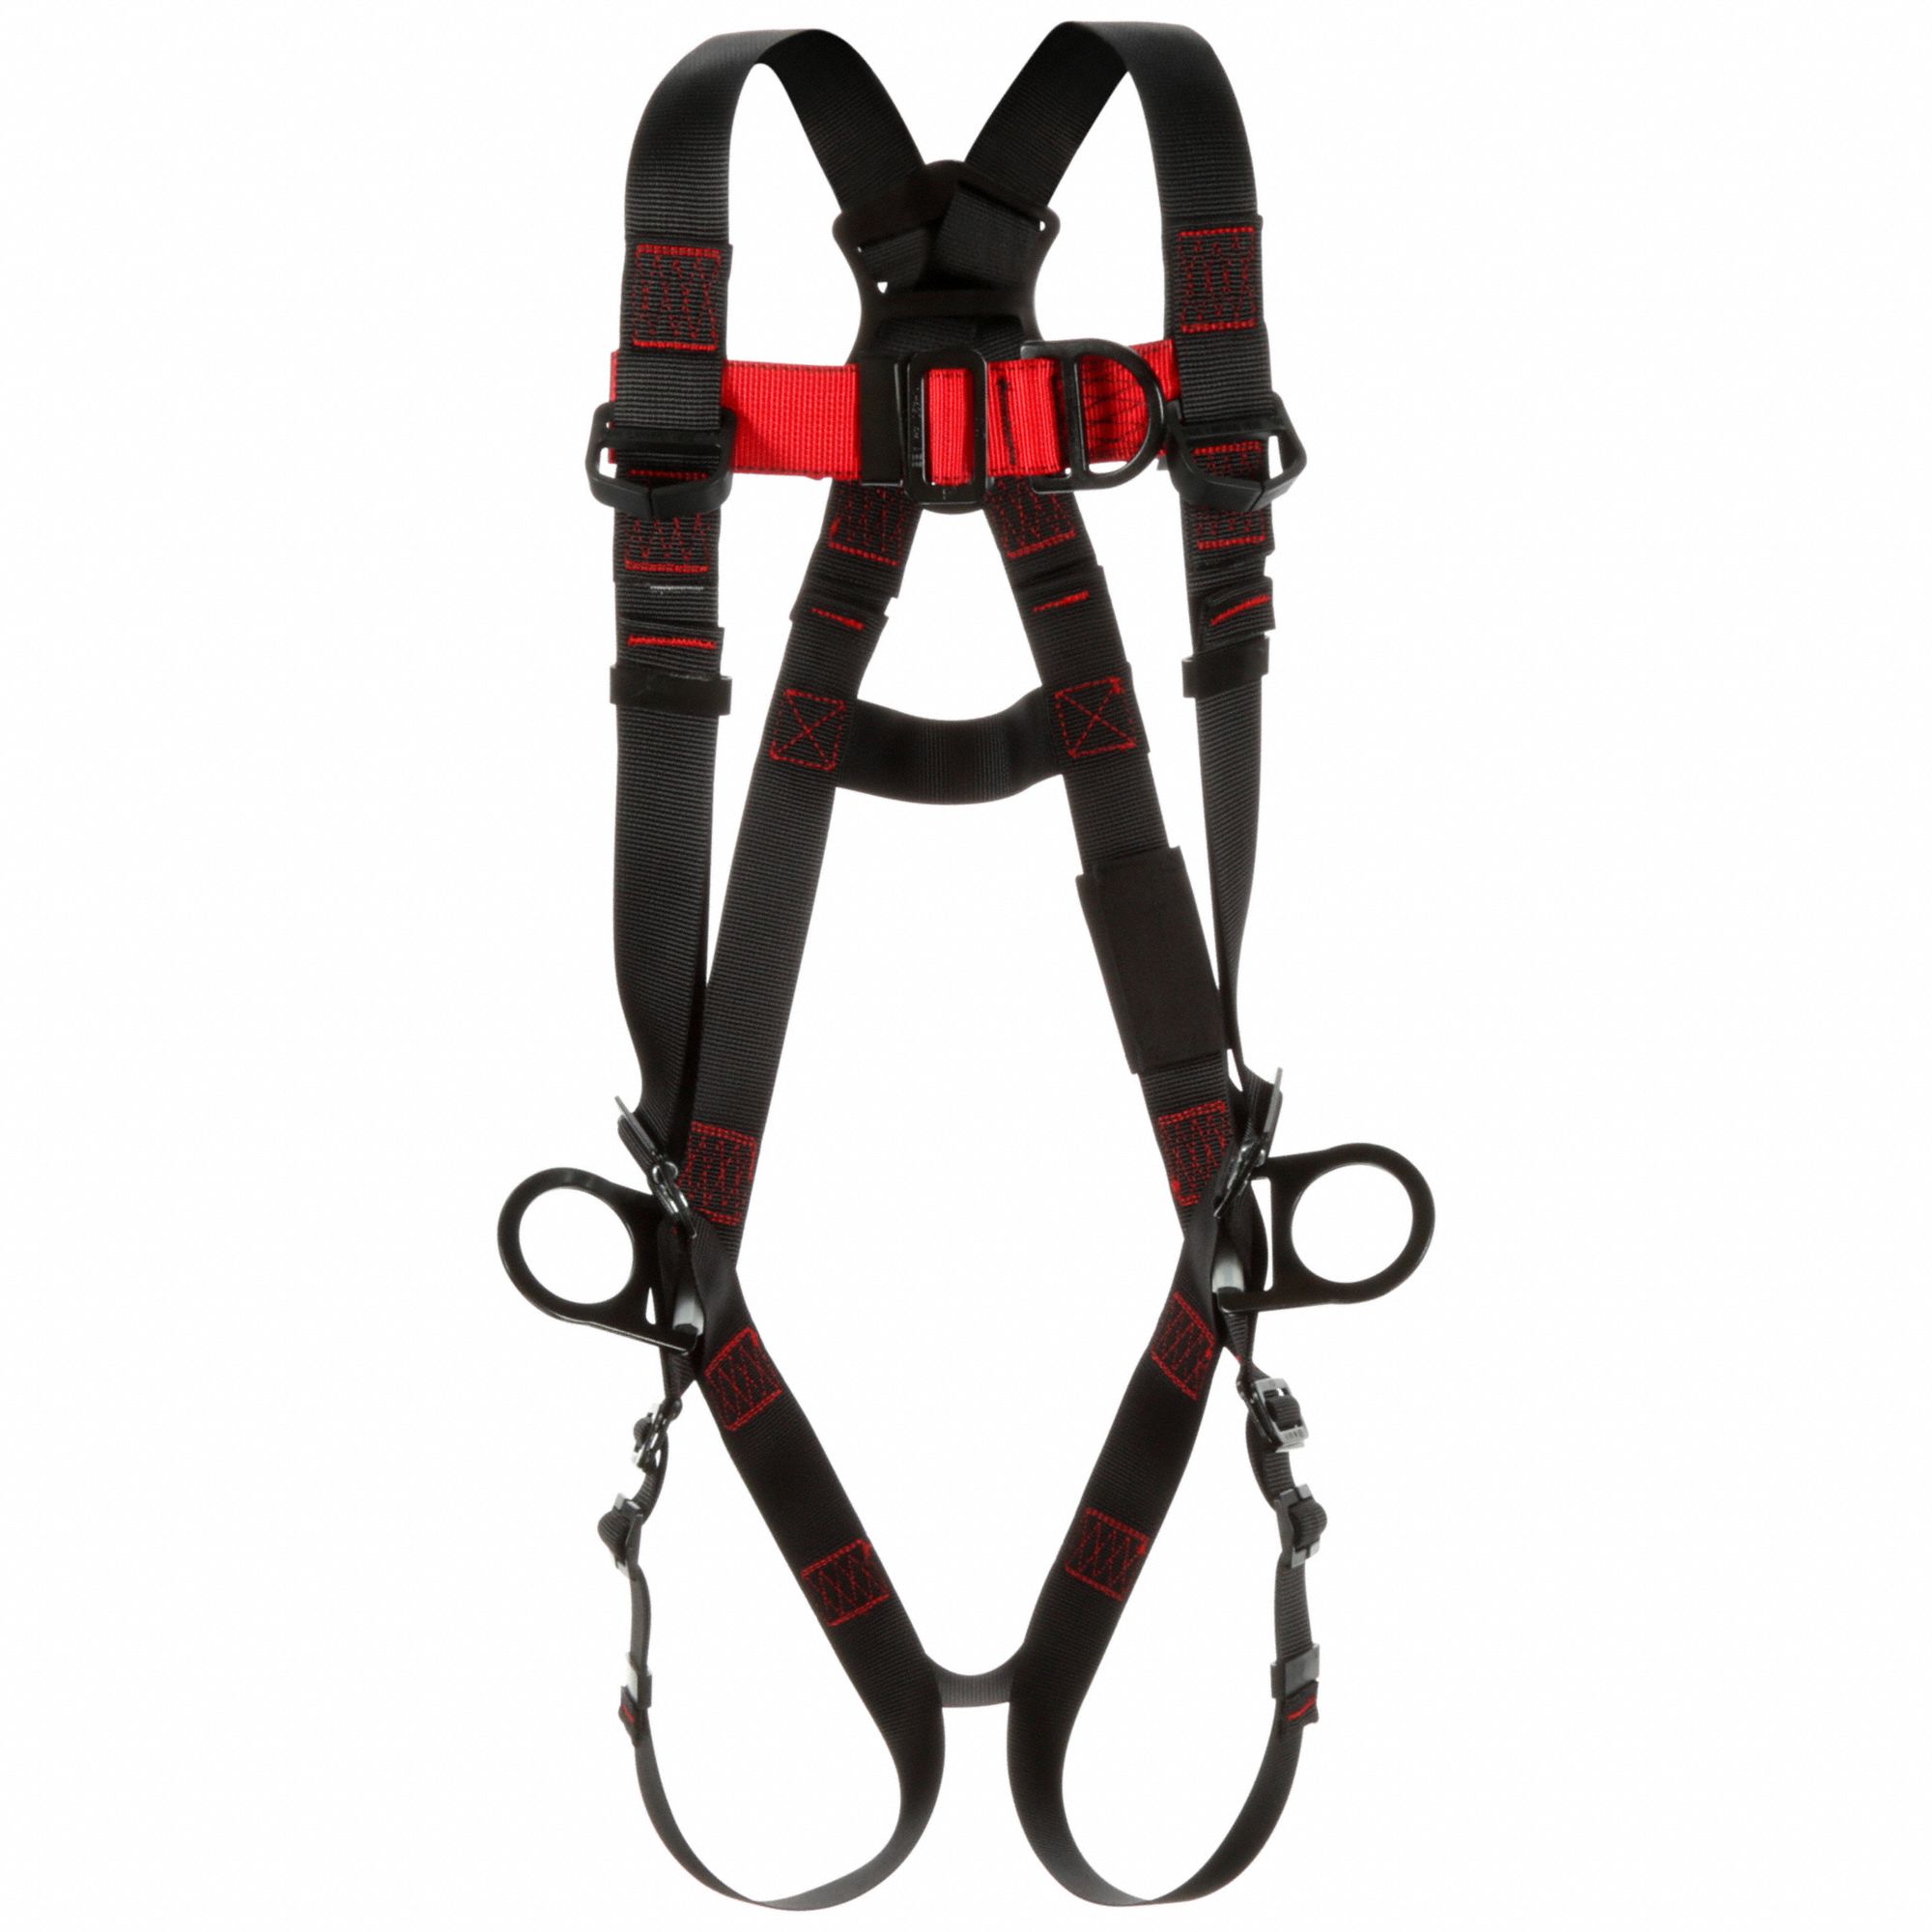 3M PROTECTA, Climbing/Positioning, Vest Harness, Full Body Harness ...